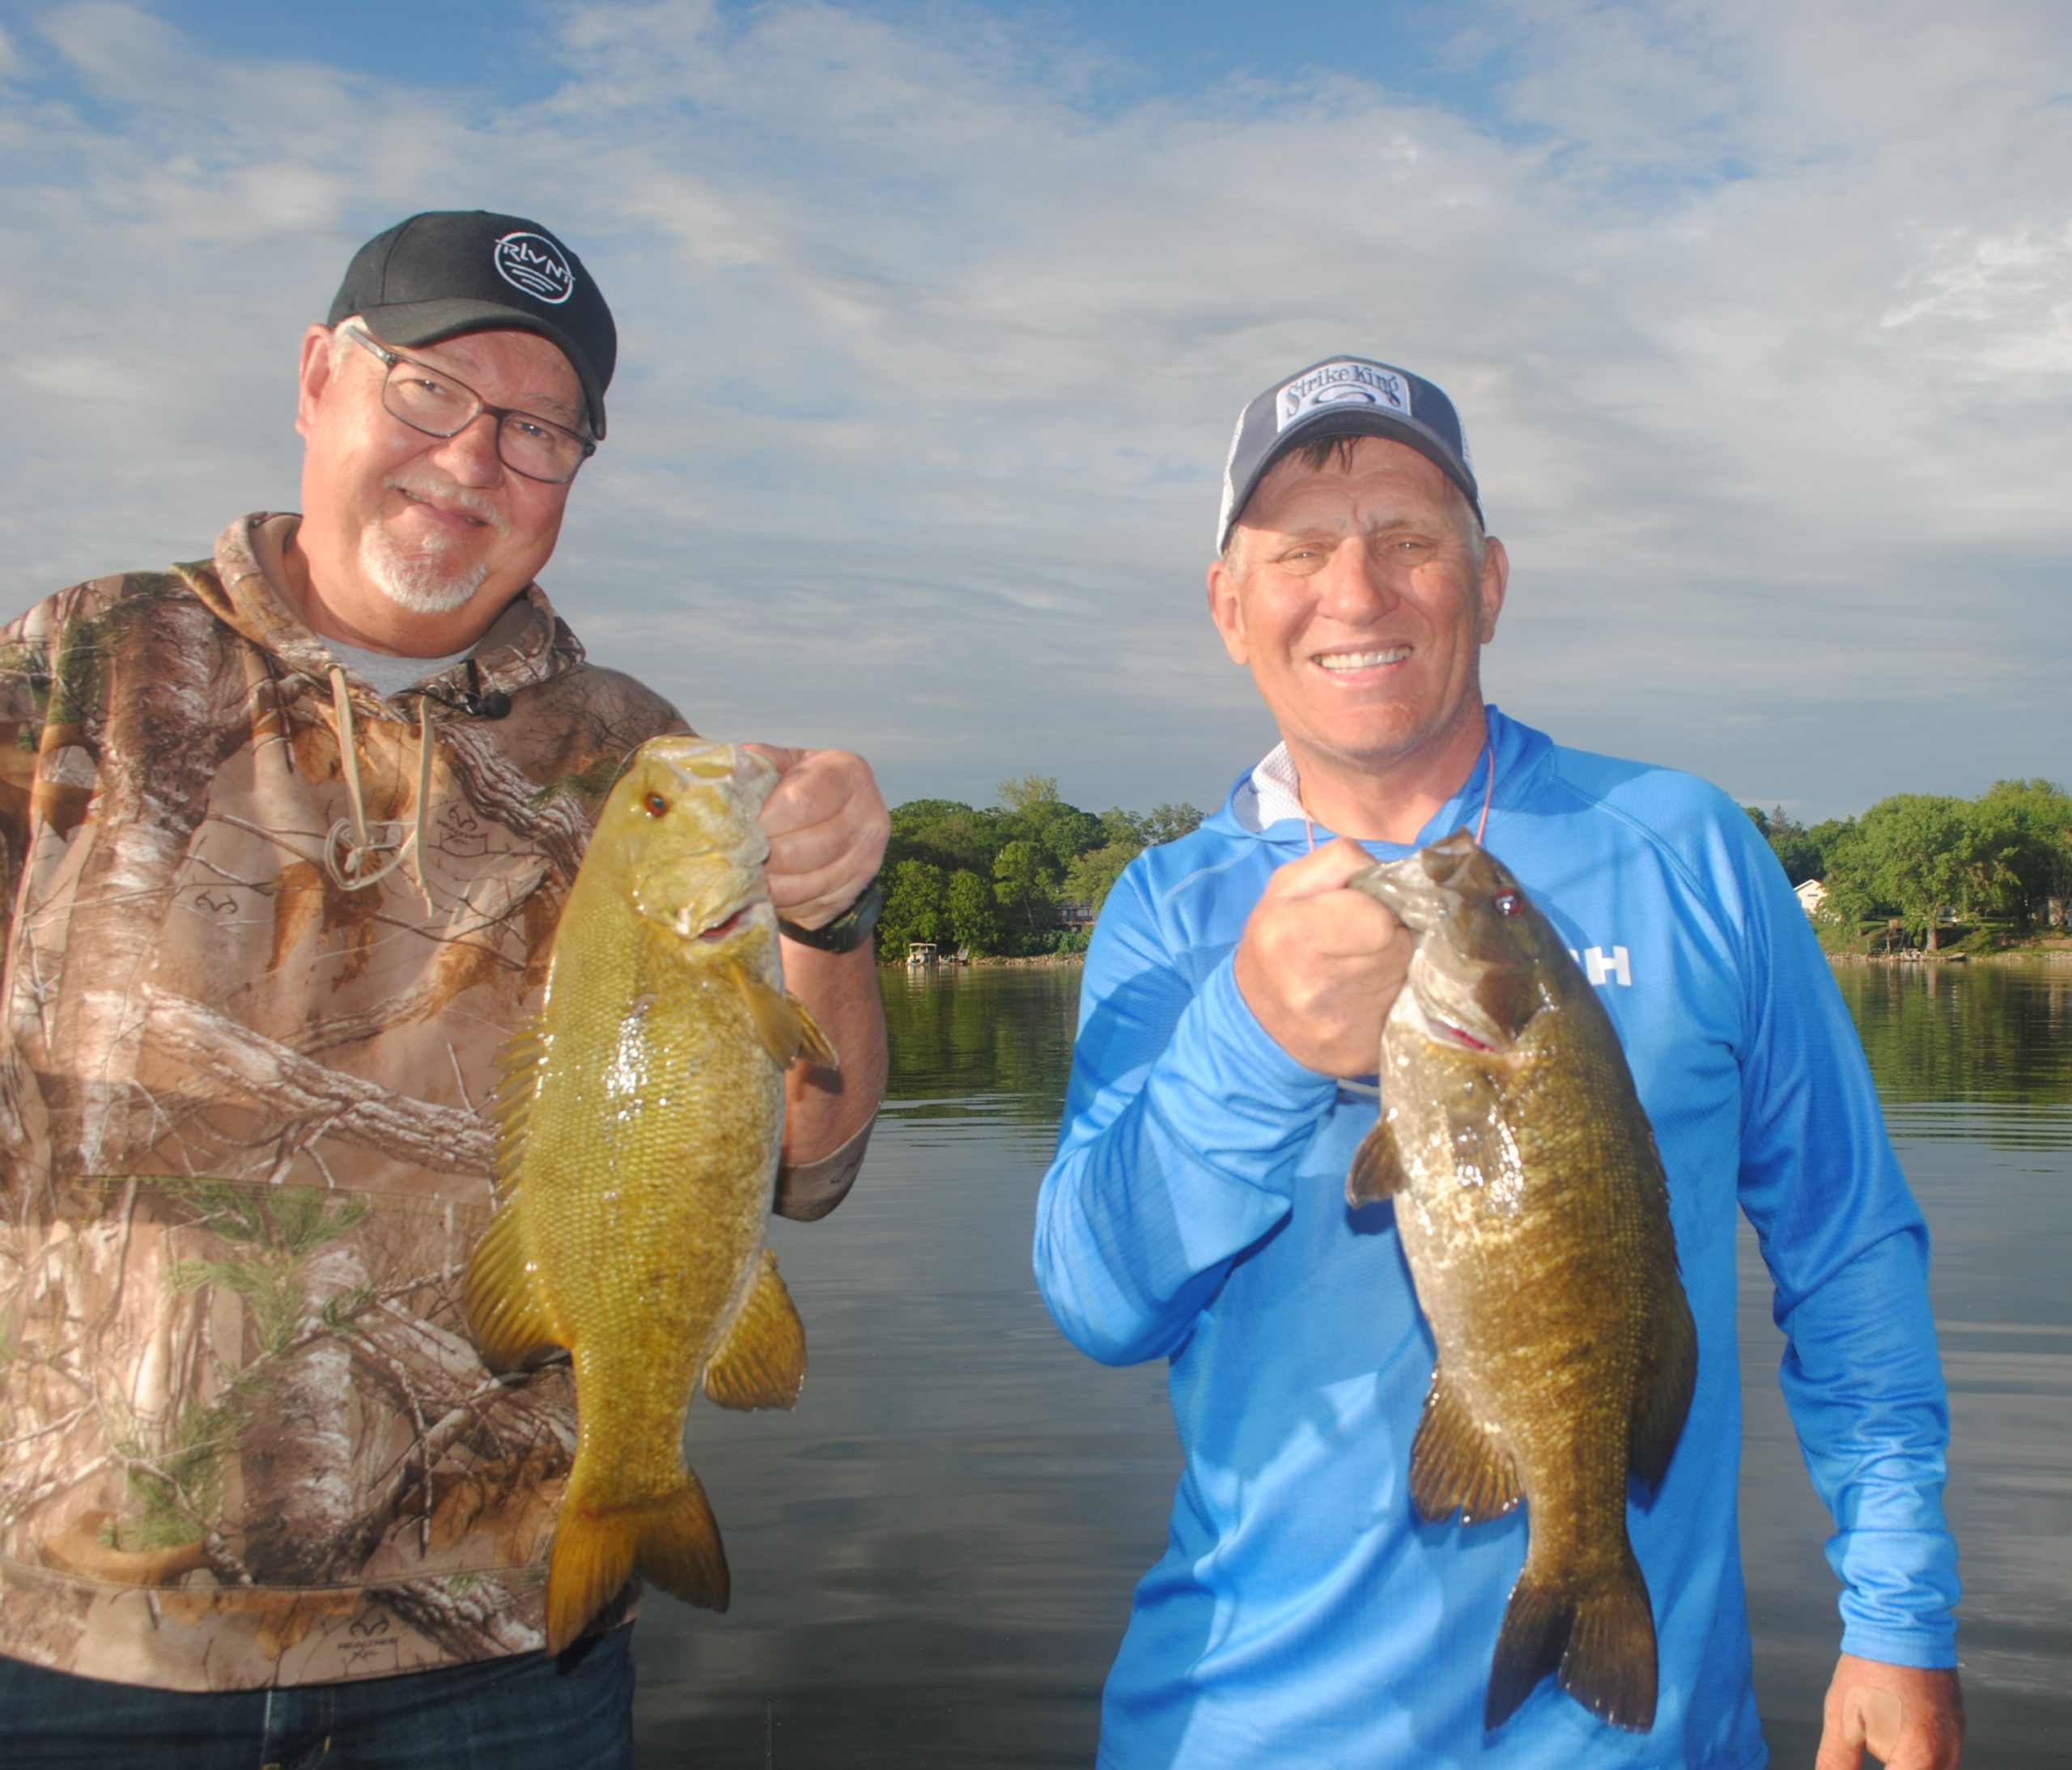 Fishing The Midwest with Jensen & Frisch